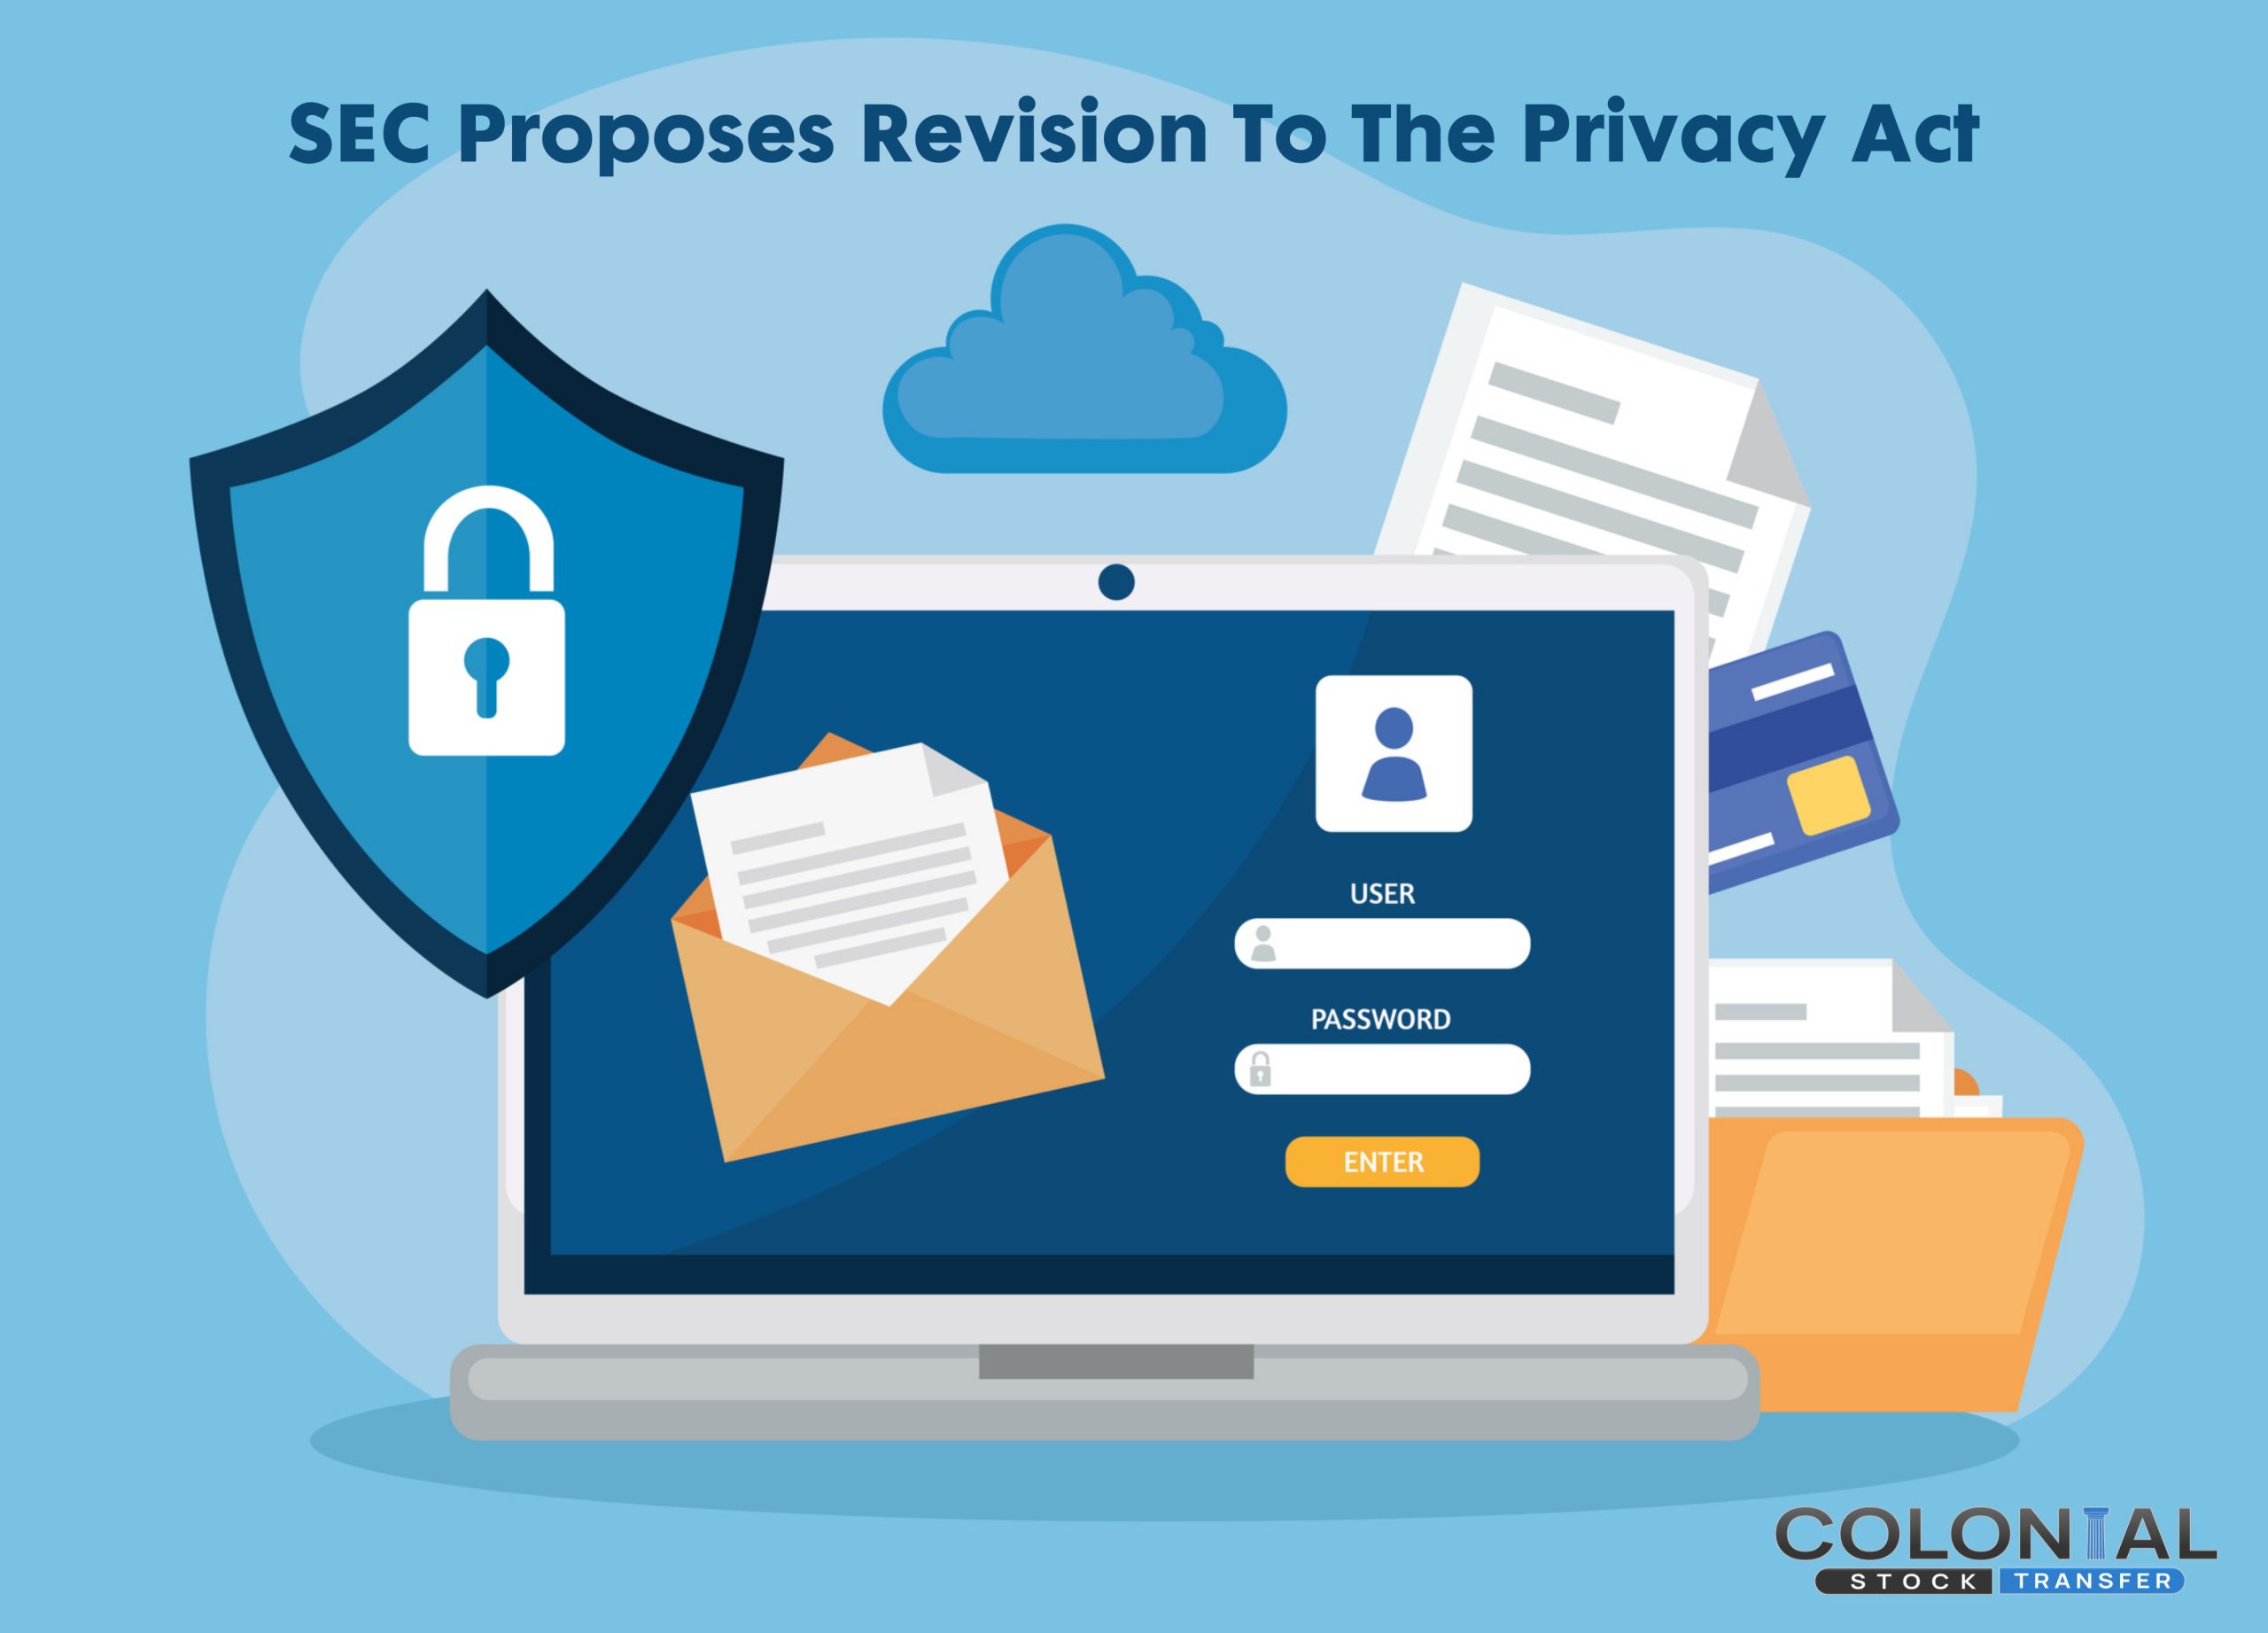 SEC Proposes Revision To The Privacy Act